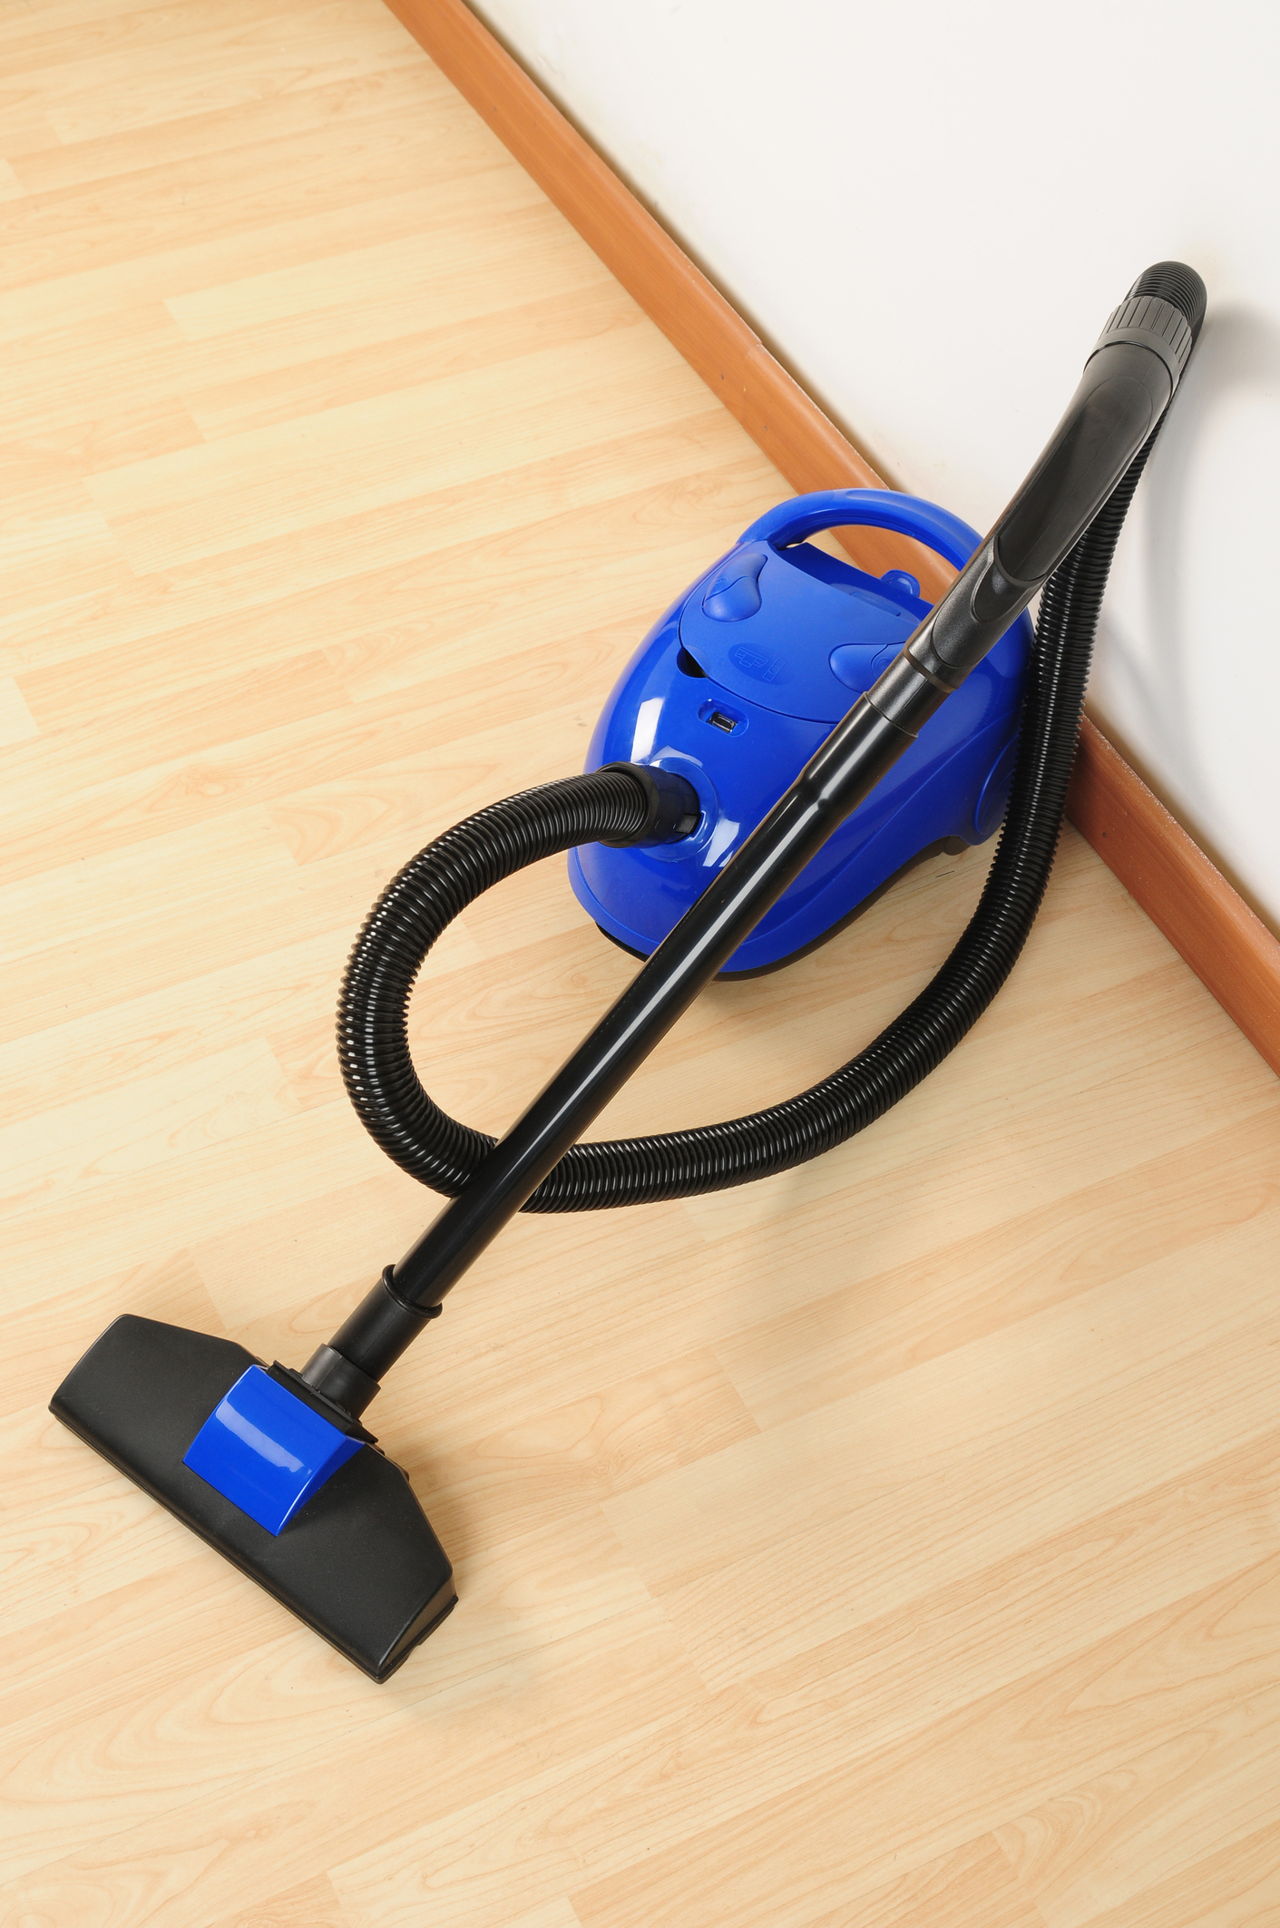 Clean Laminate Floors Without Streaking, How To Clean Laminate Floors Without Streaking